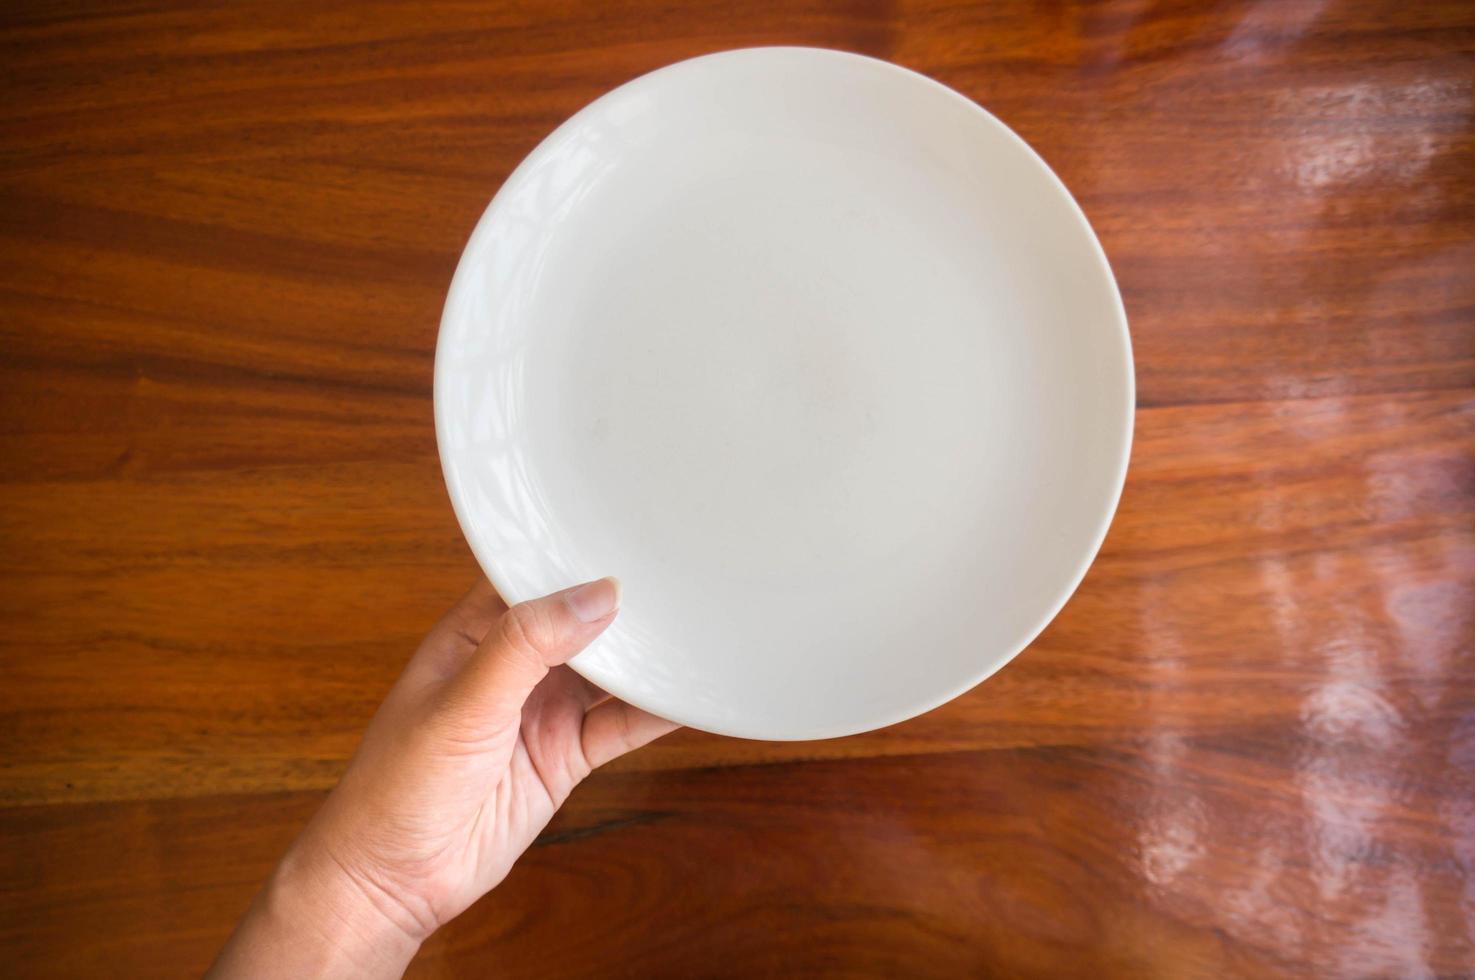 Female hands hold a white dish plate photo